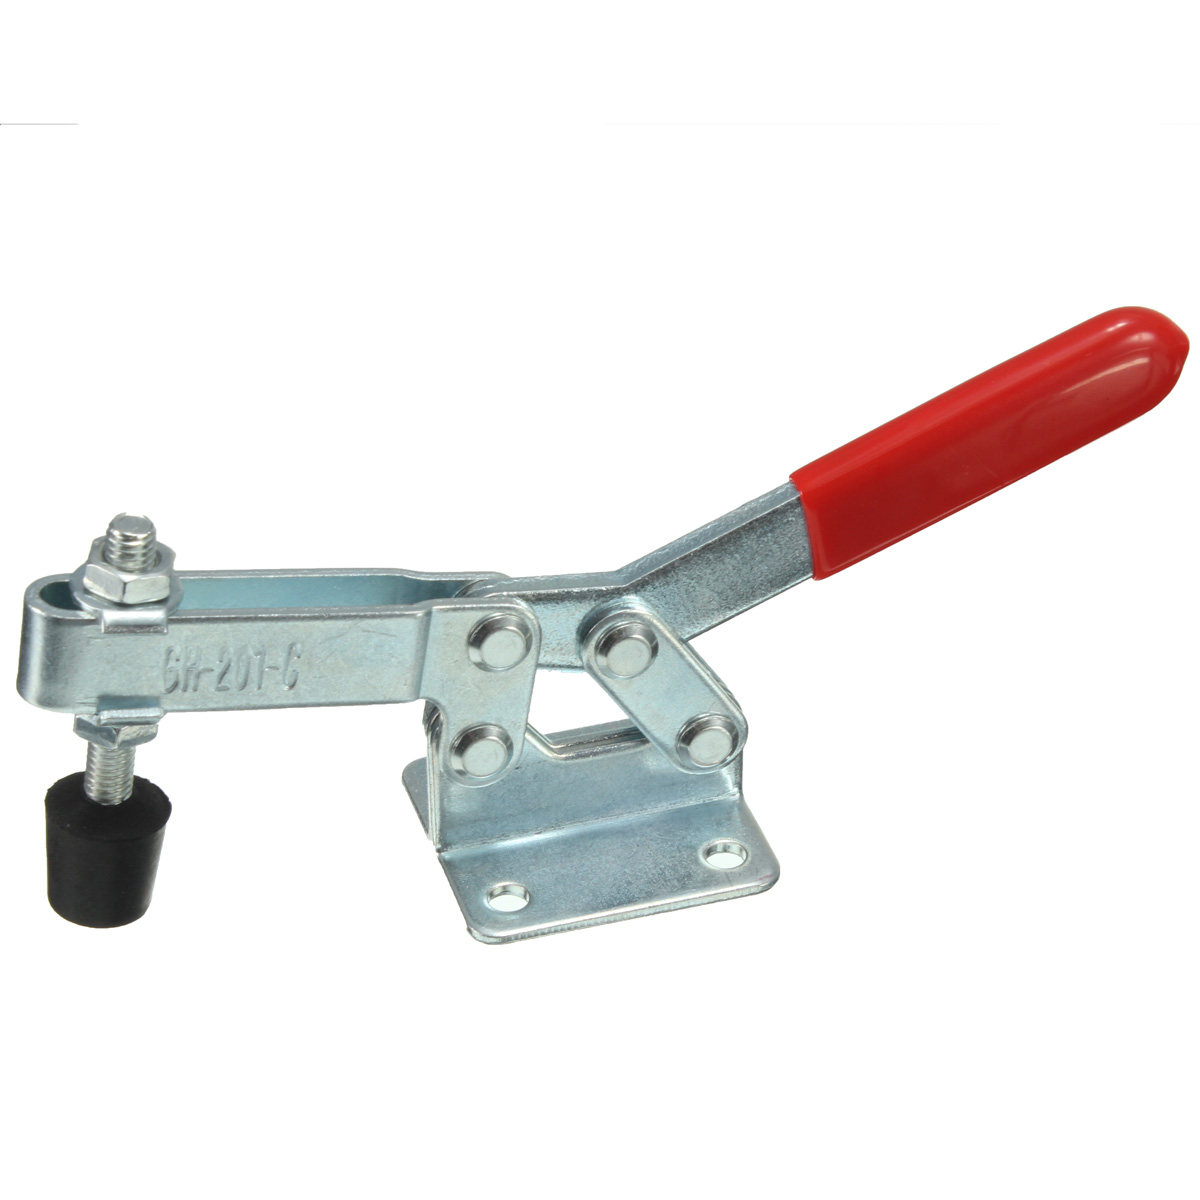 Raitooltrade-QR02-Quick-Release-Fast-Clamp-201-C-Horizontal-Type-Clamp-For-Fixing-Workpiece-976855